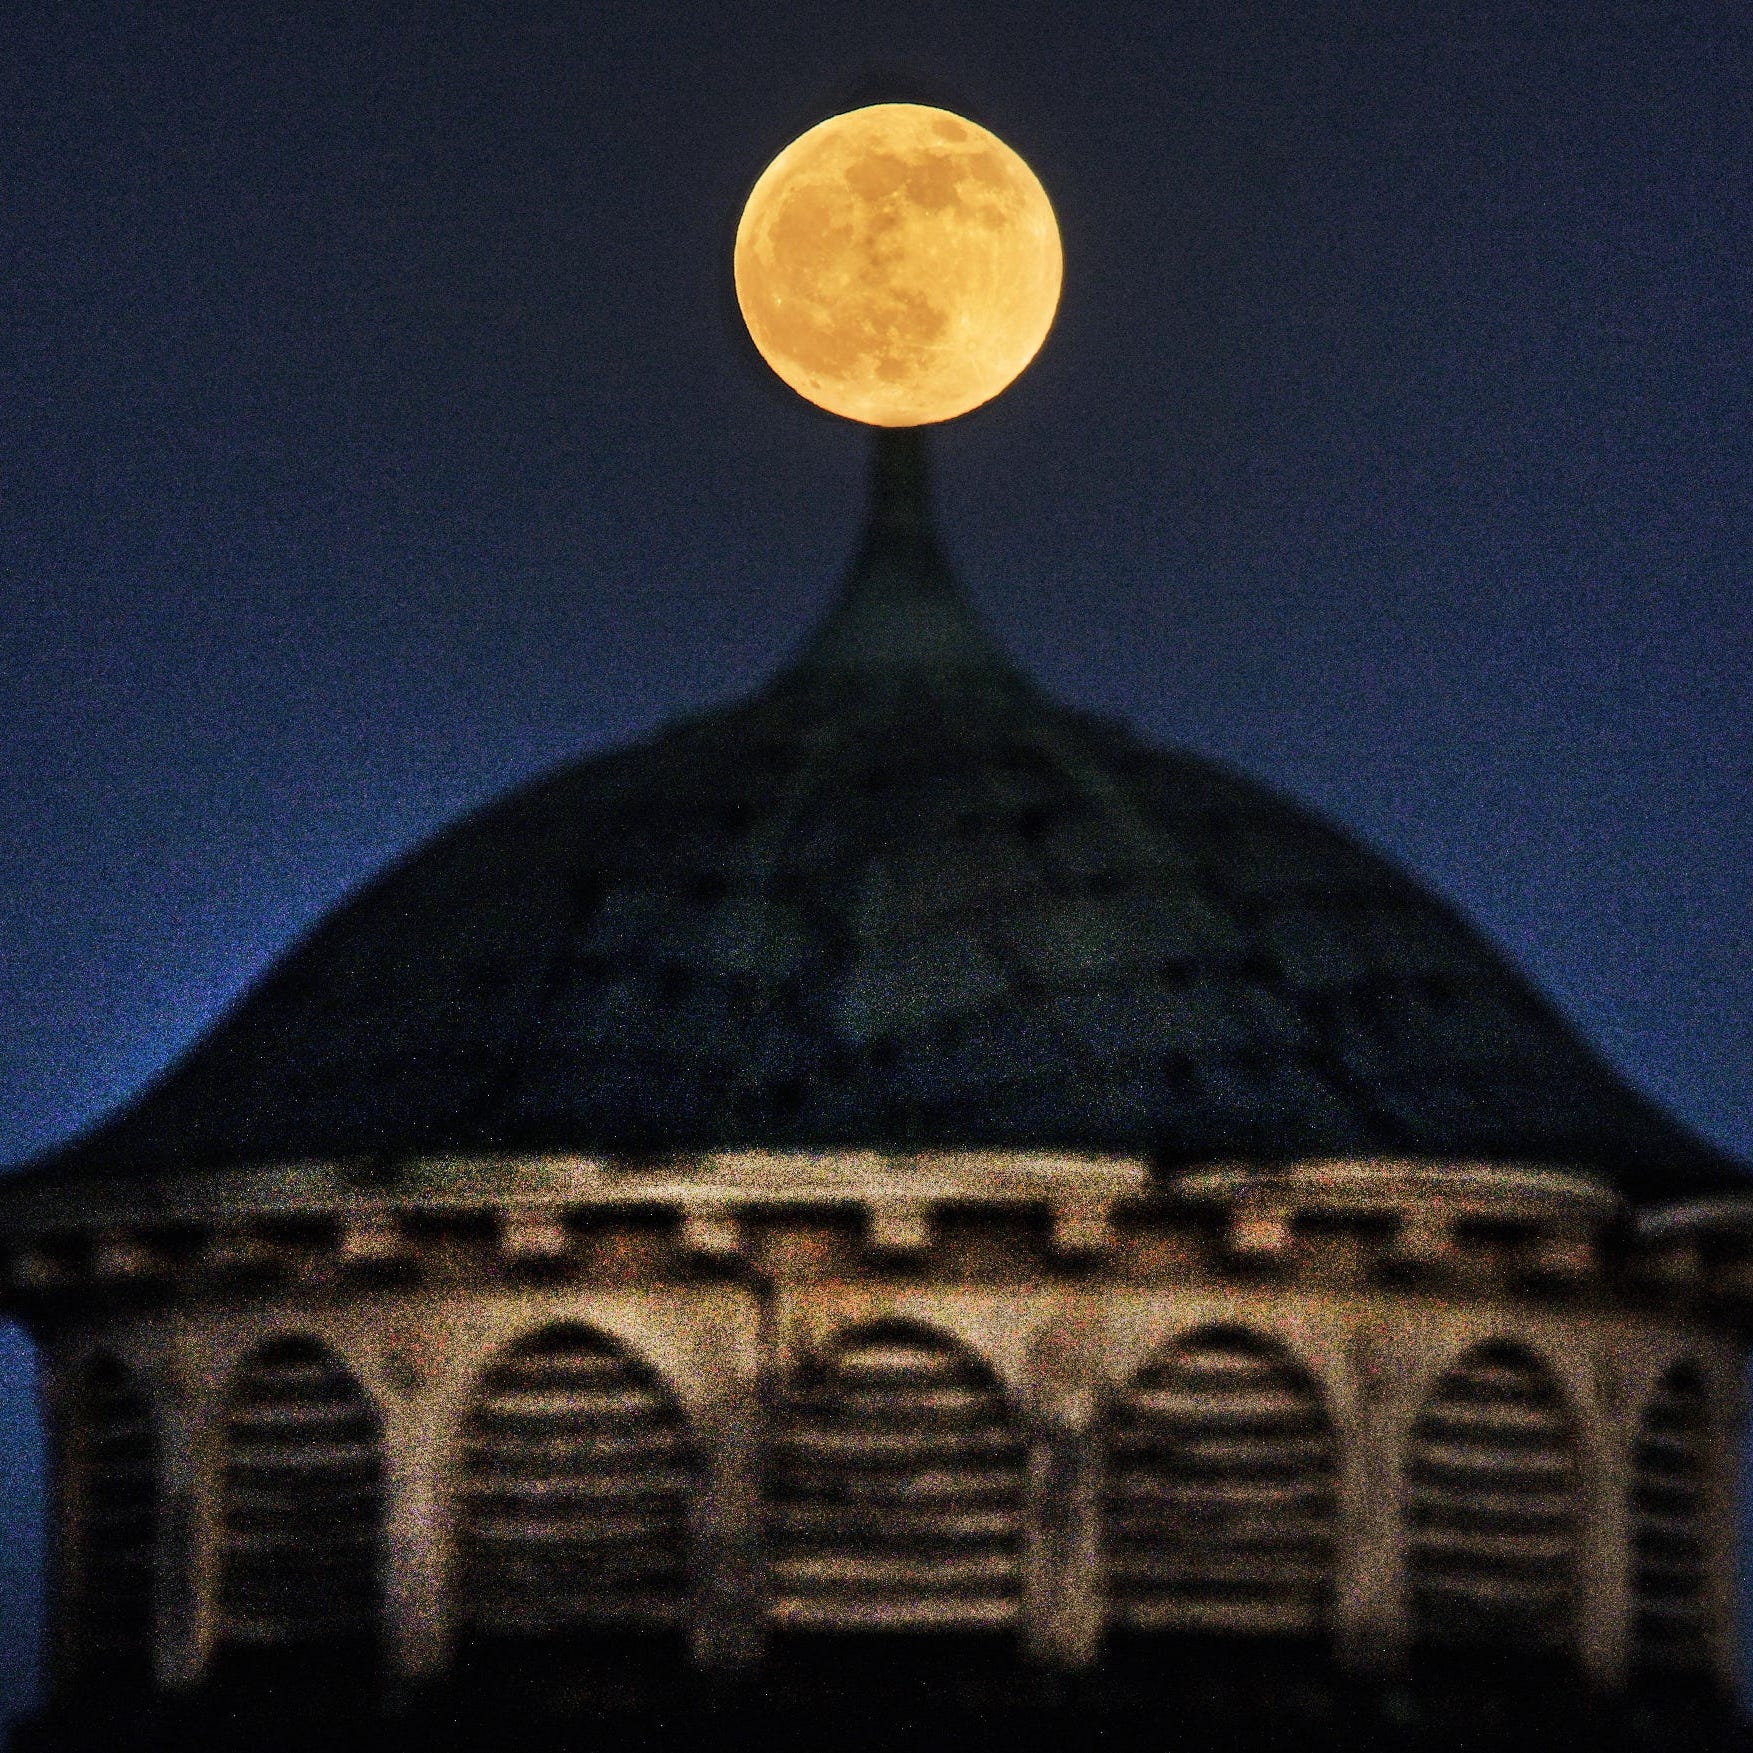 The full moon rises above Hooper Turret, a round stone building, on the property of the former Worcester State Hospital on Tuesday, December 29, 2020.